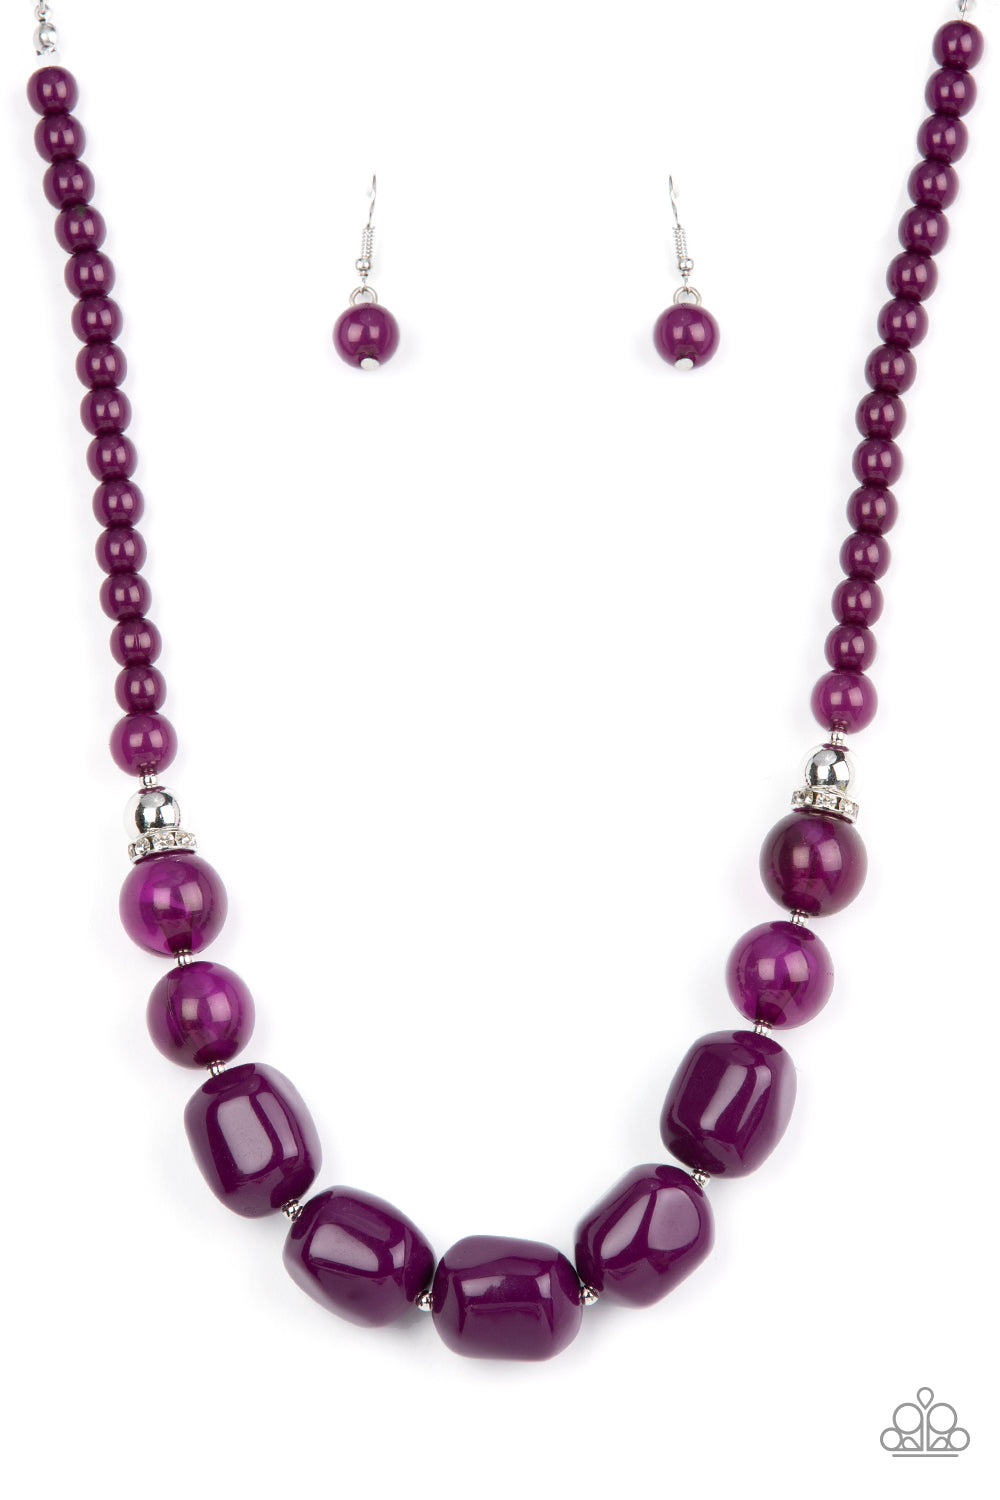 Accented with bright silver beads and glittery rhinestone accents, a row of oversized subtly faceted plum beads gives way to marbled plum beads that transition to smaller opaque plum beads as they make their way around the collar for a modern fashion. Features an adjustable clasp closure.